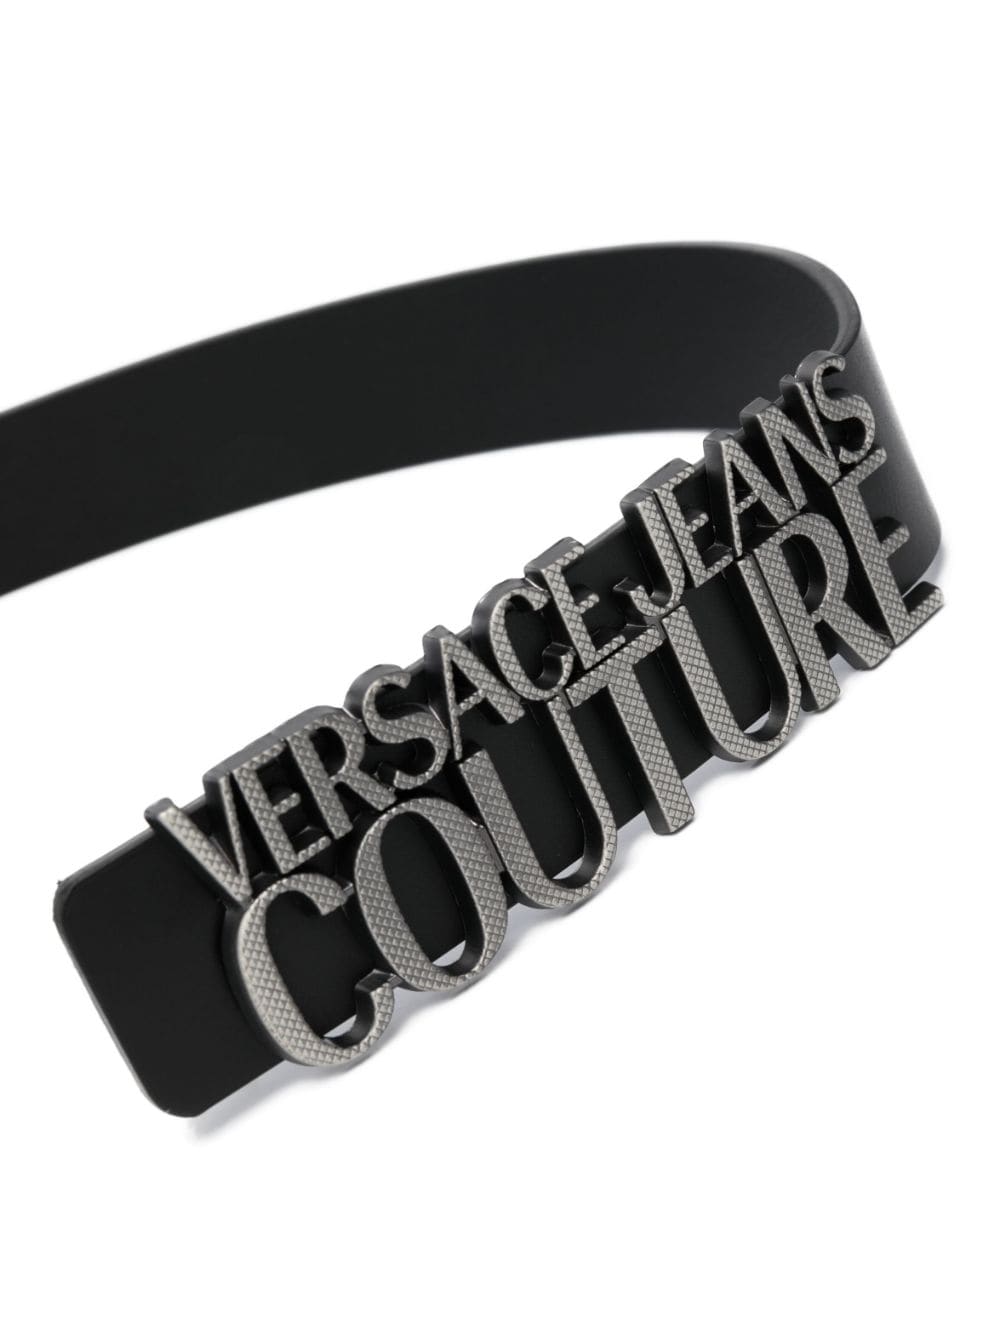 Versace Jeans Couture Couture Cintura Belt in Black for Men